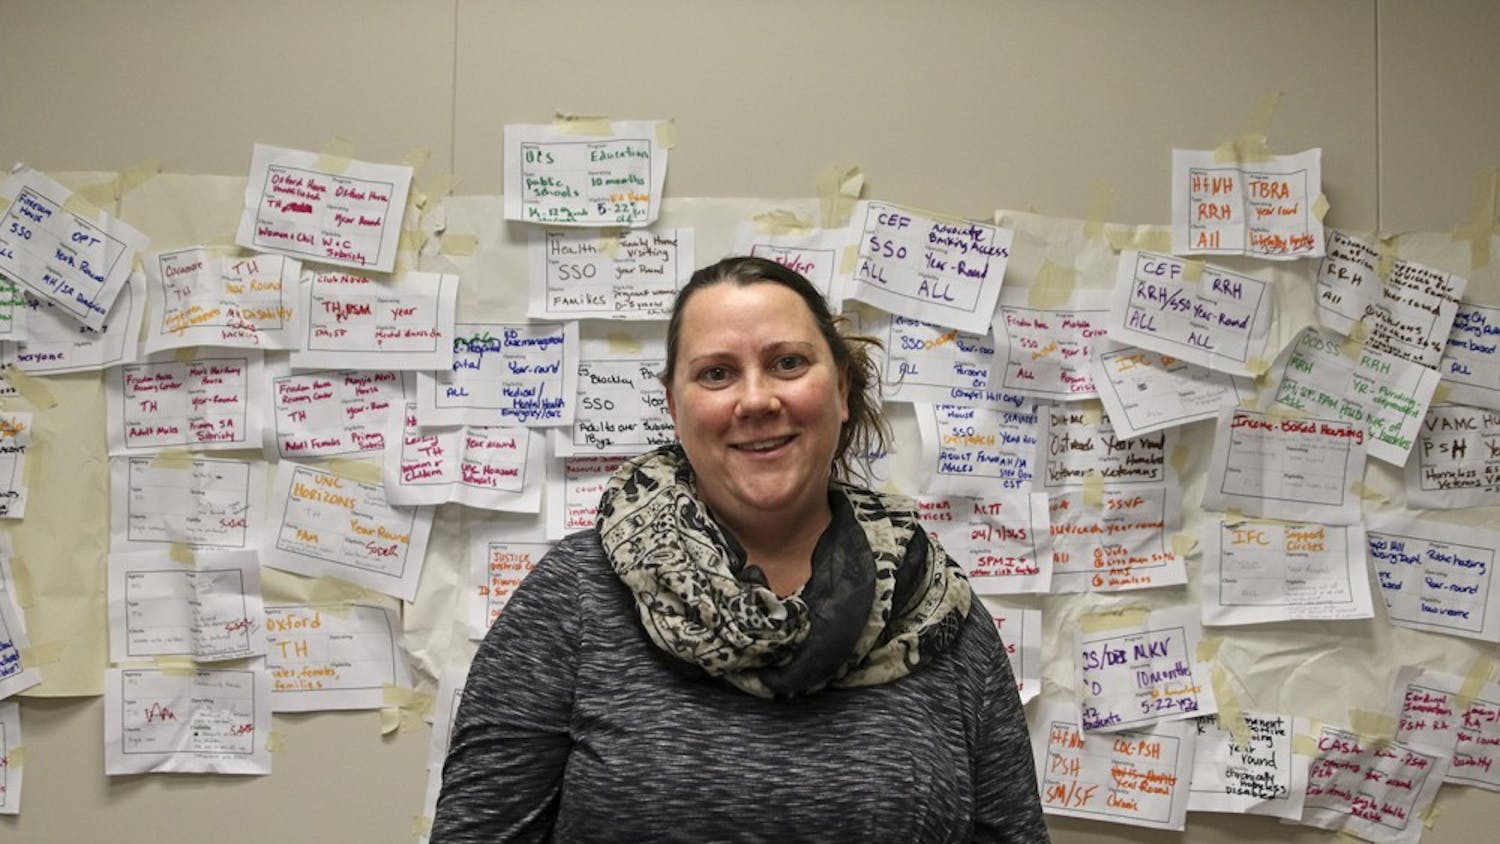 Corey Root is the Homeless Program coordinator for Orange County. Behind her is a wall covered in different cases of people she plans to enter into the system.